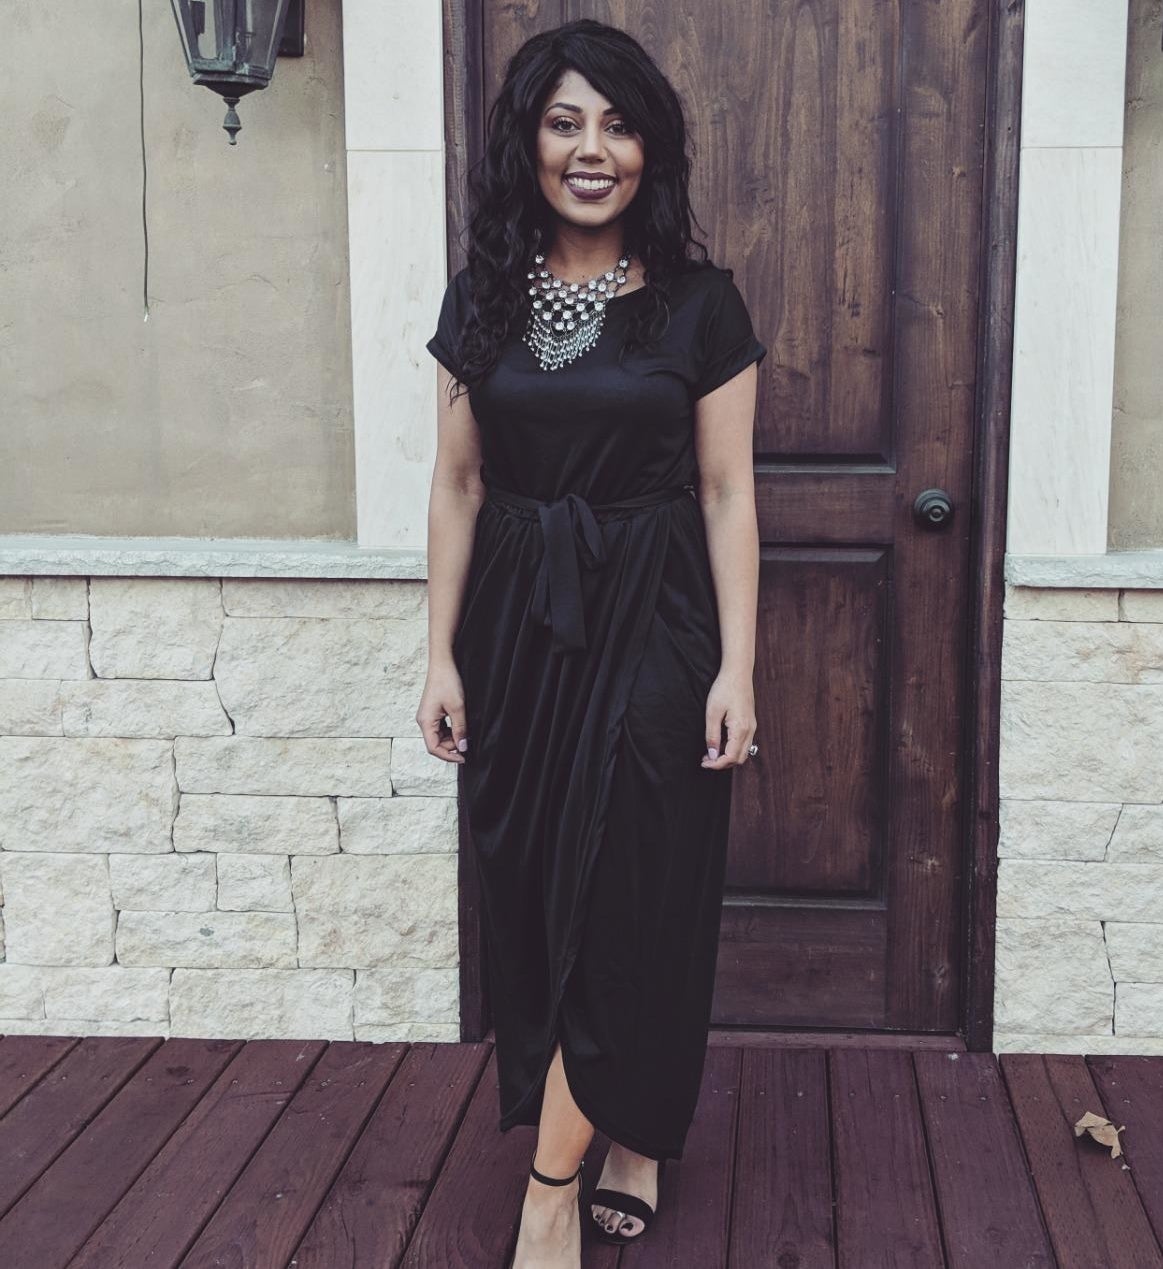 Reviewer wearing the dress in black